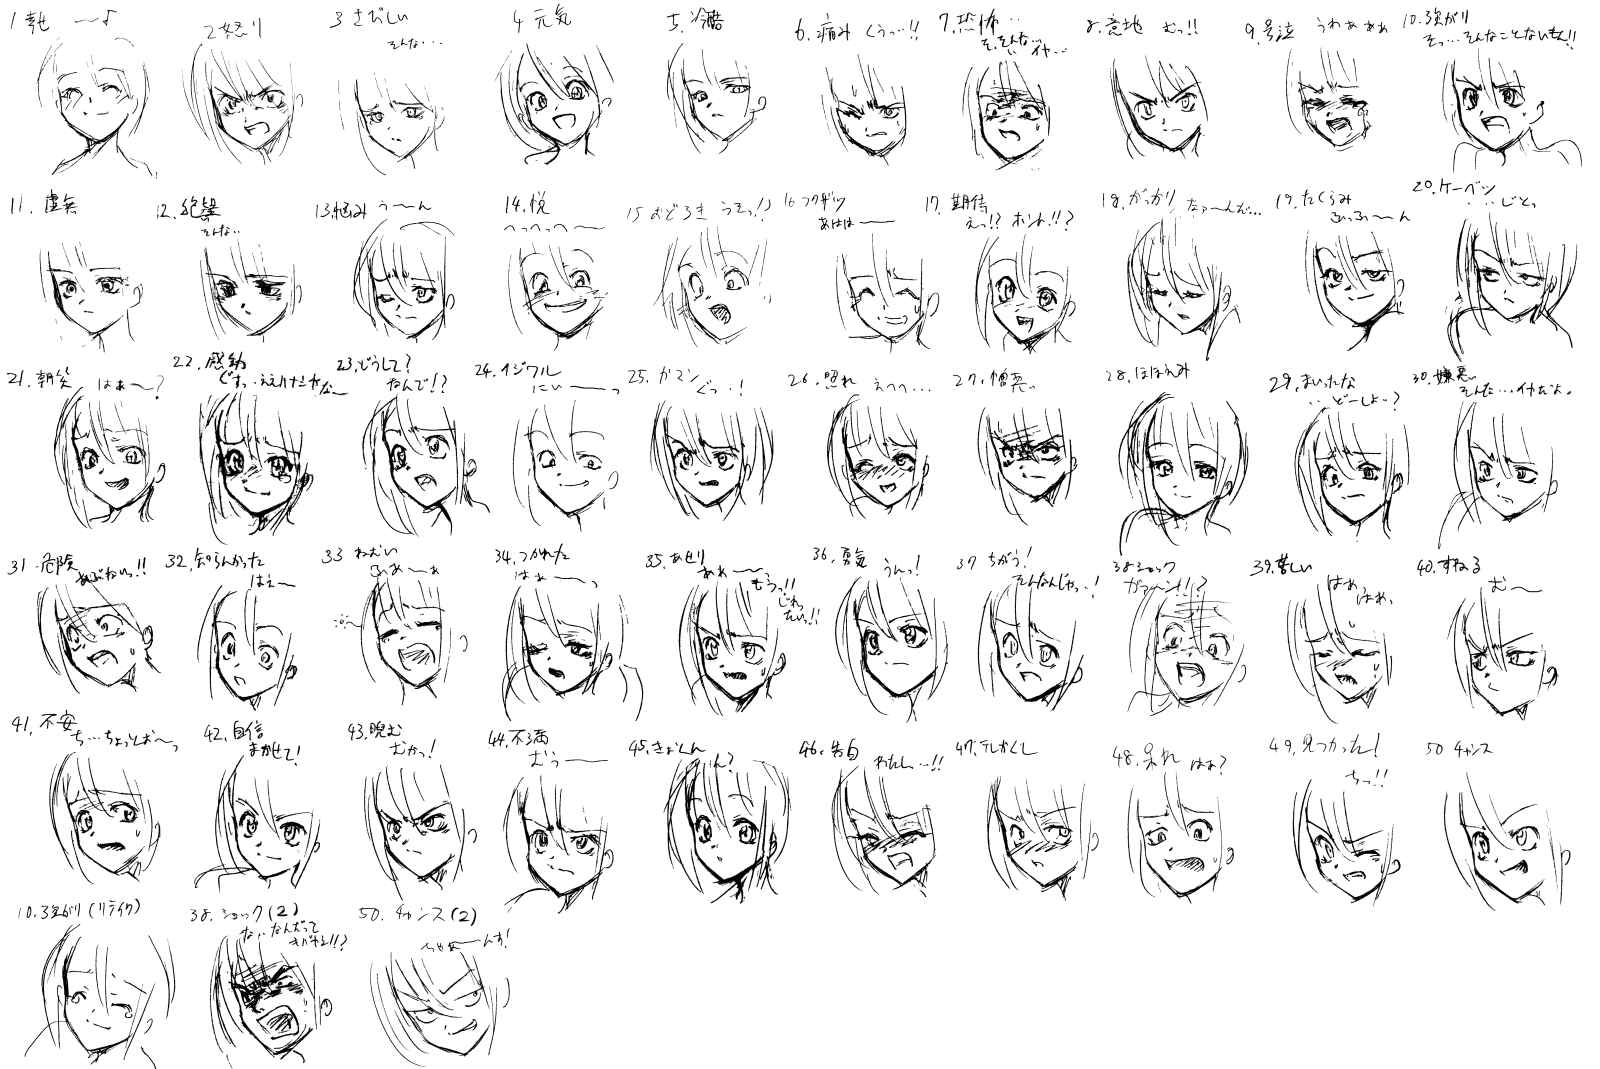 60 Manga and Anime Expressions by goosebump91 on DeviantArt